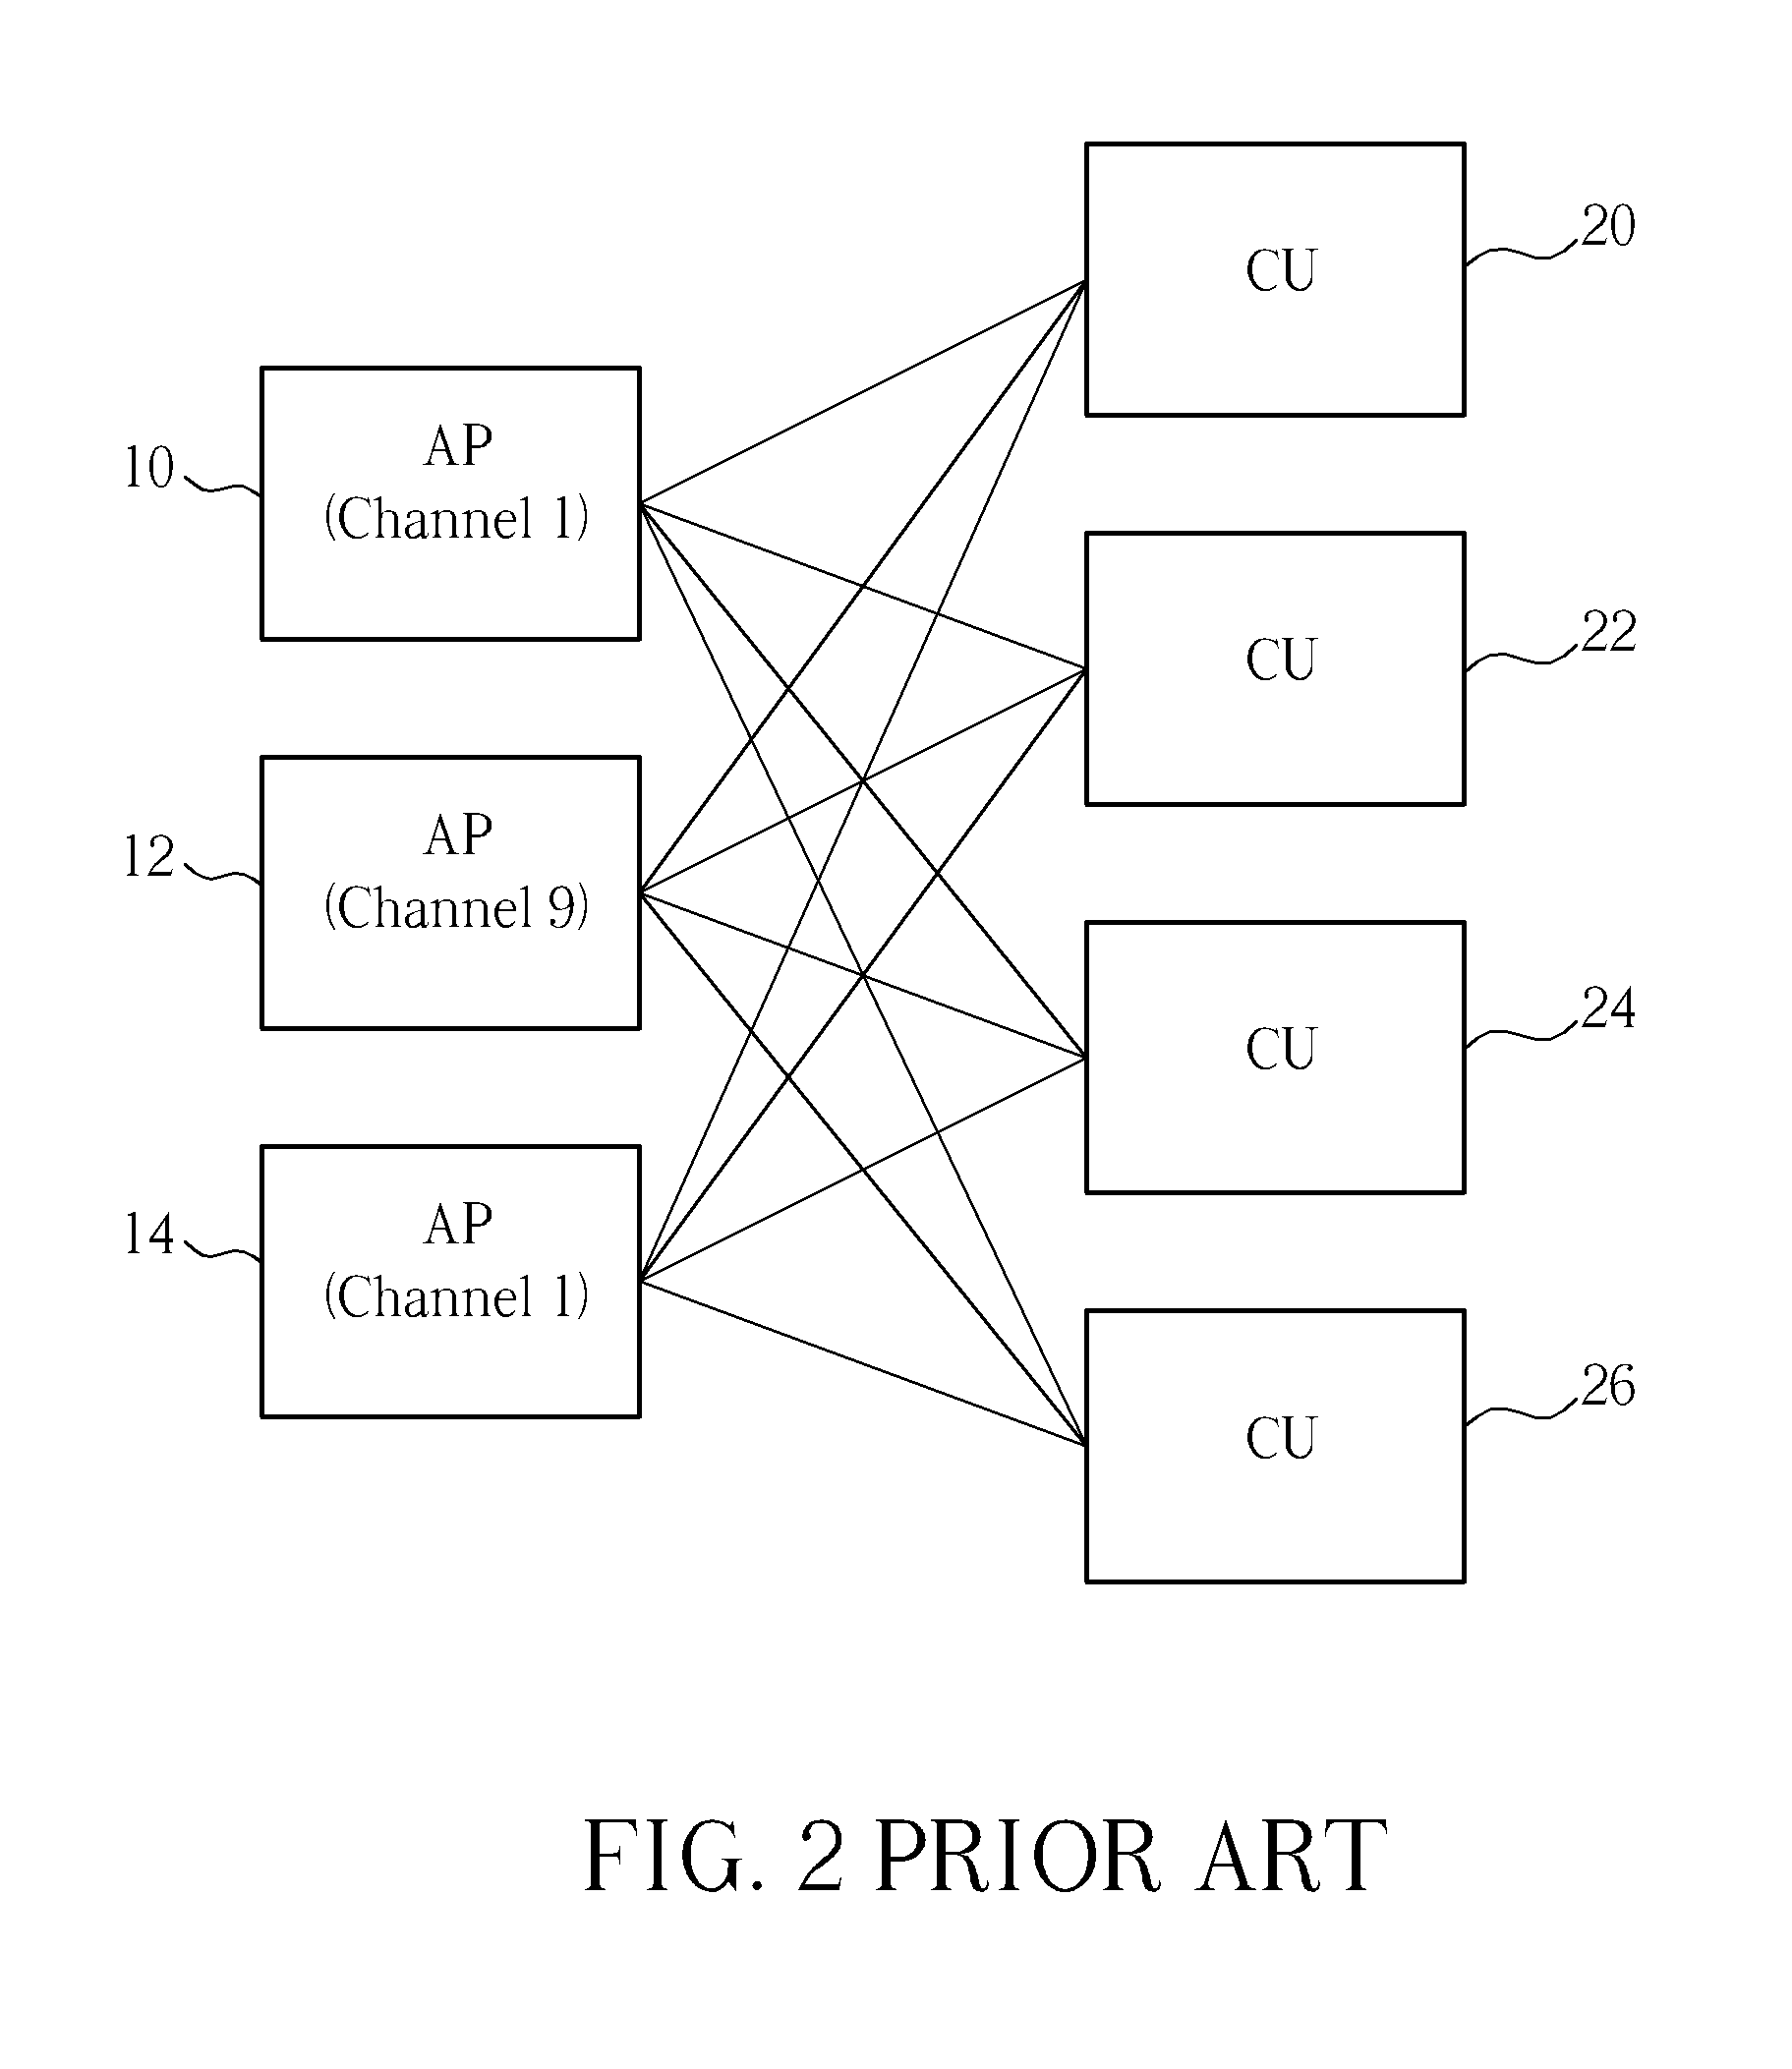 Methods of optimizing scanning parameters for a plurality of channels in a wireless band